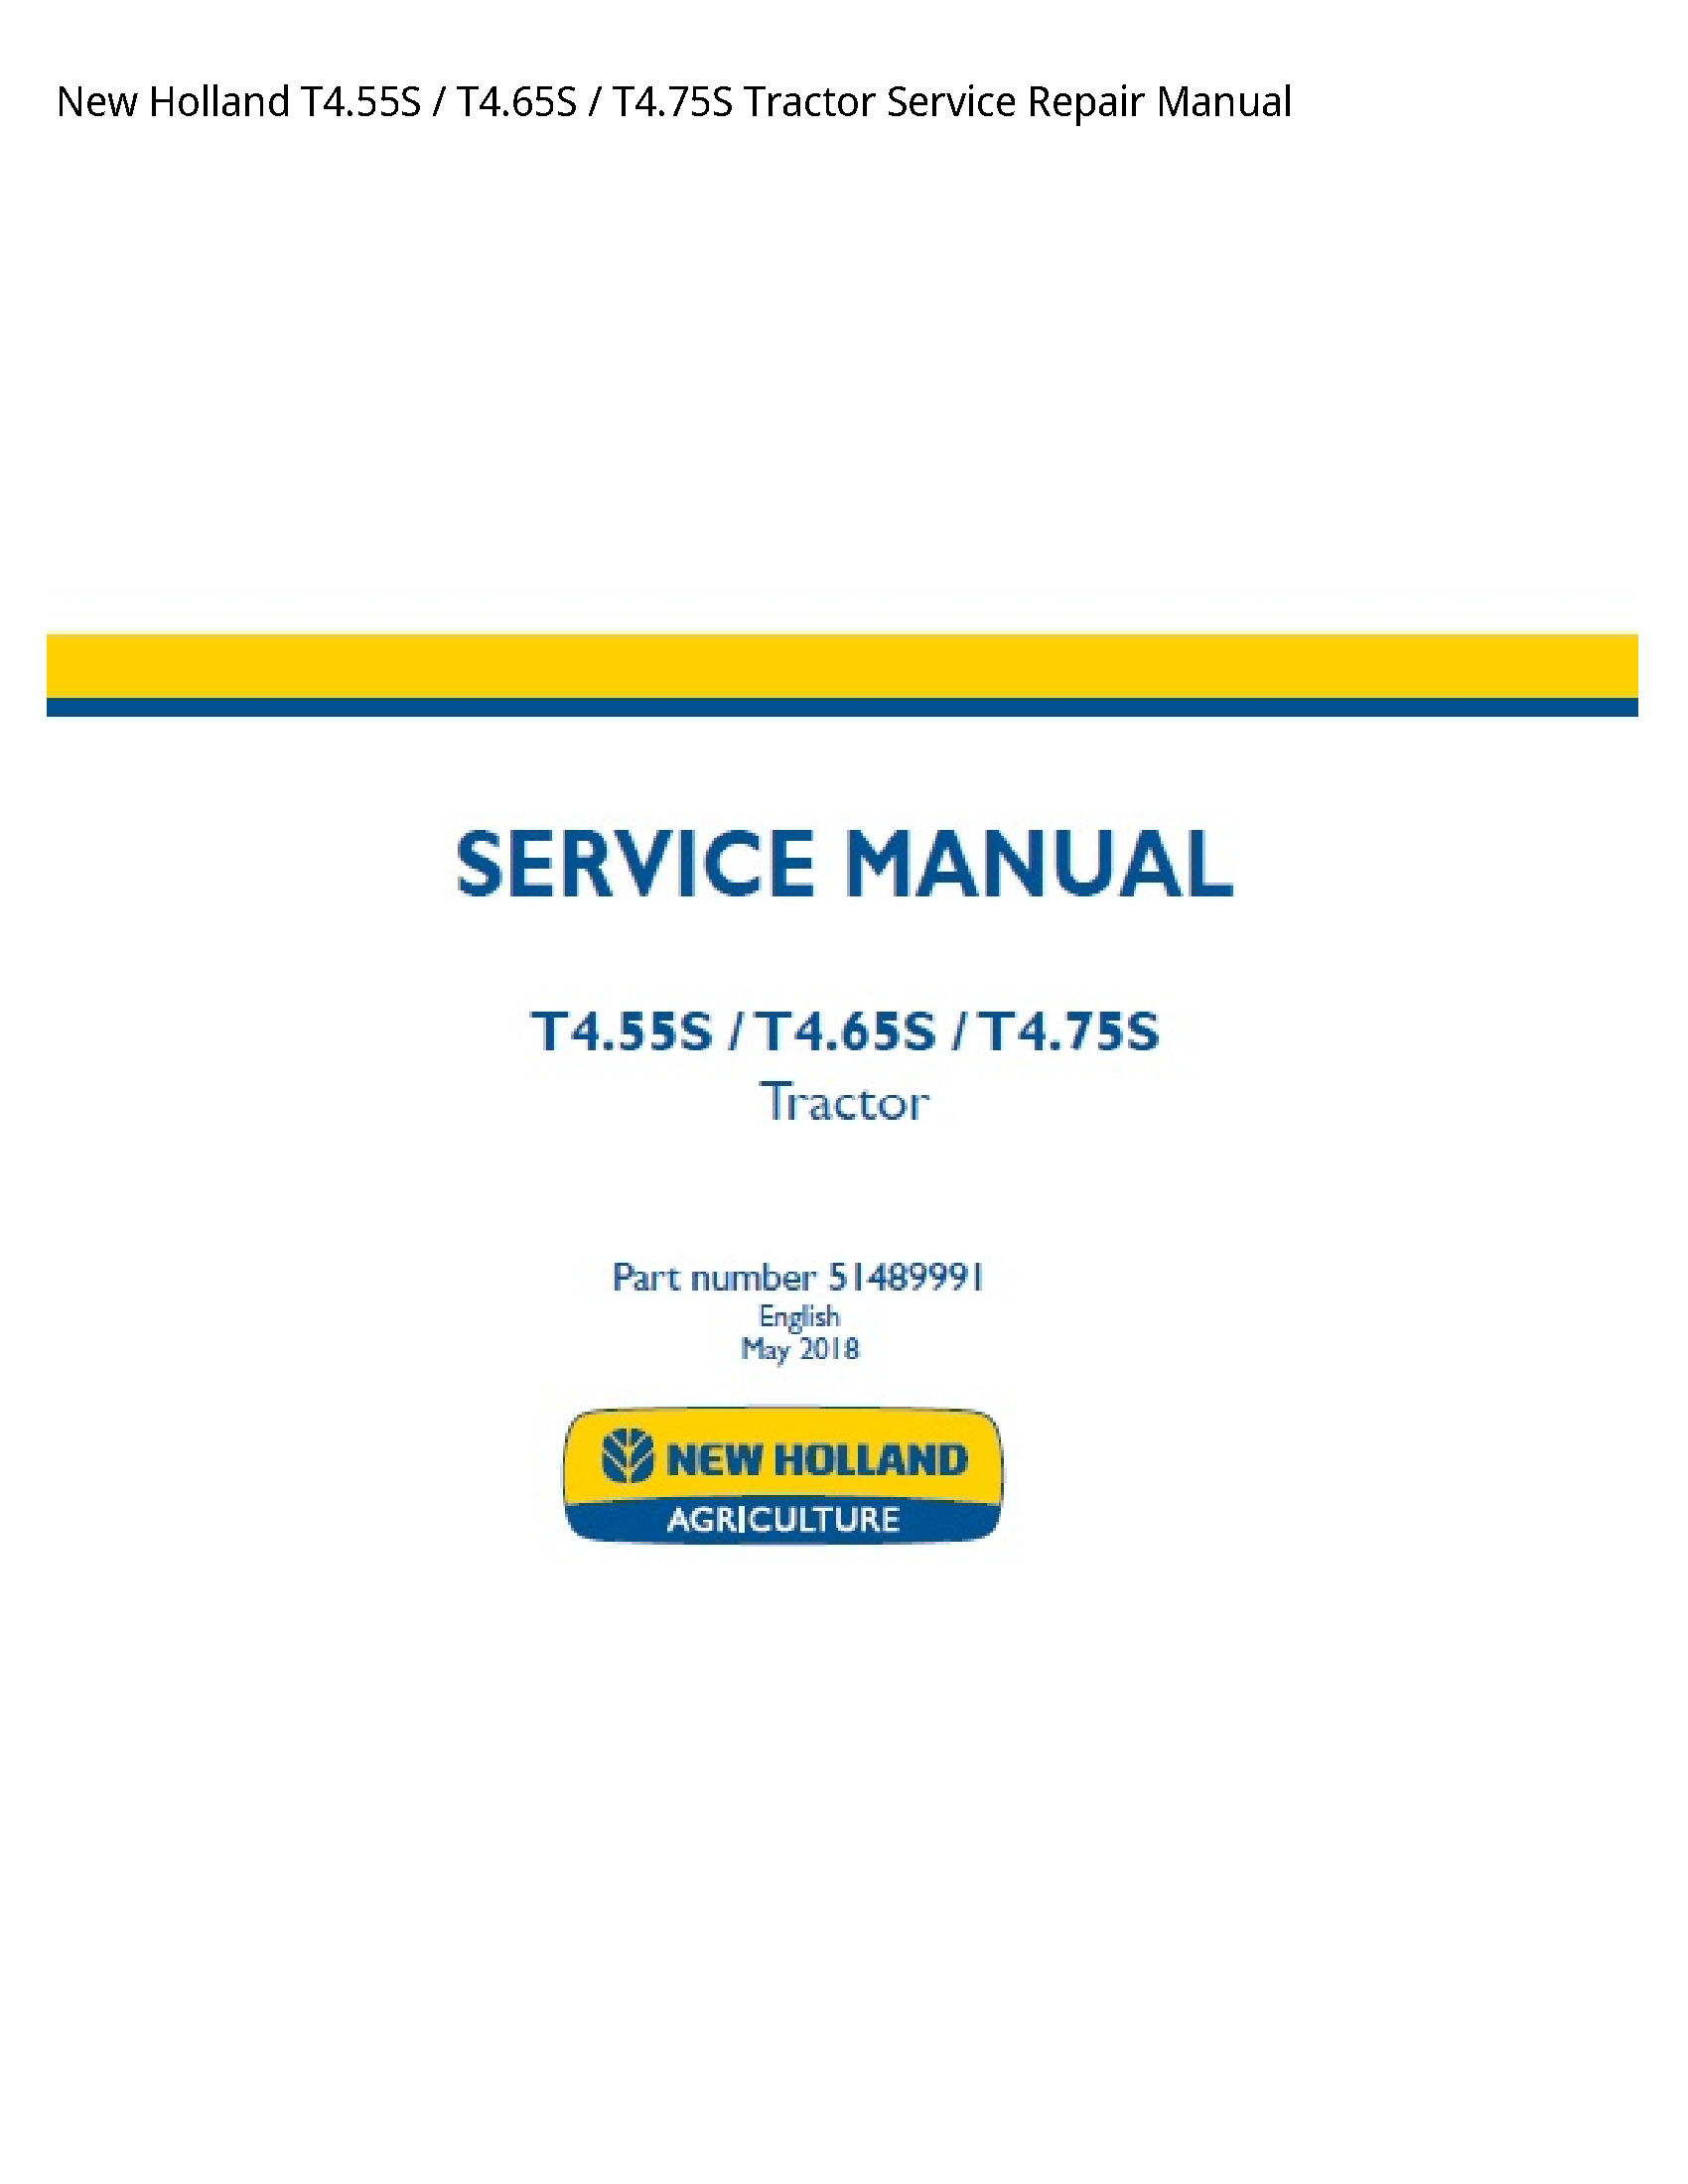 New Holland T4.55S Tractor manual